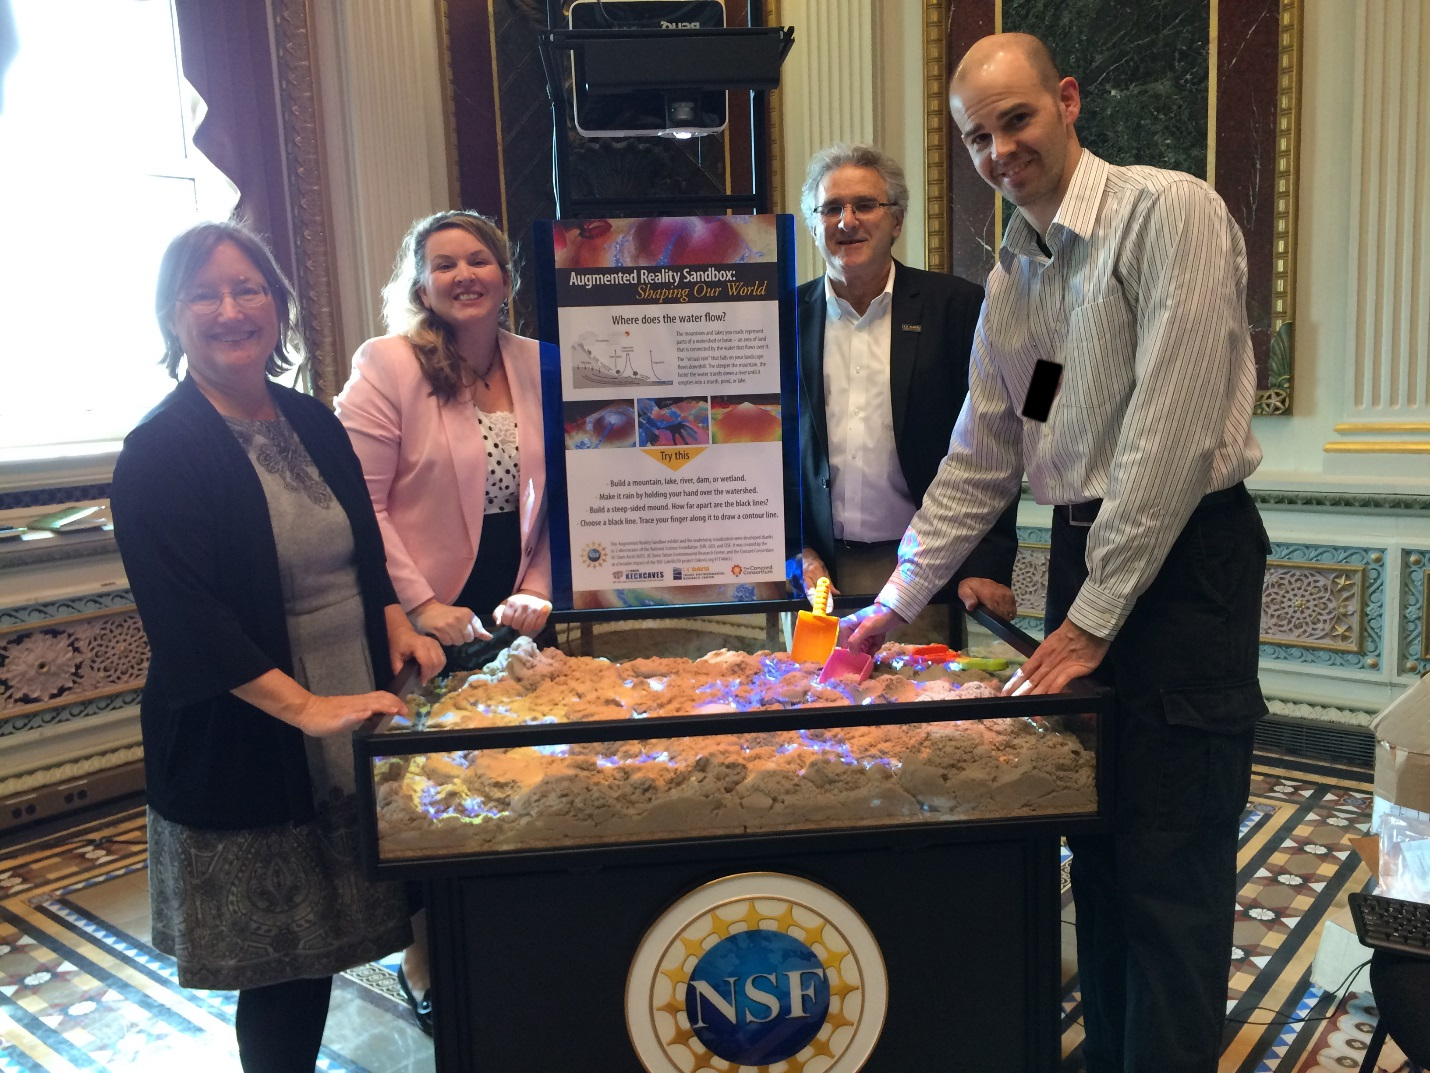 New commercial-grade AR Sandbox model at the White House Water Summit, 03/22/2016. Left to right: Dr. Louise H. Kellogg, Neysa Call, Dr. S. Geoffrey Schladow, Dr. Oliver Kreylos. Photo credit: Terry Davies, National Science Foundation.